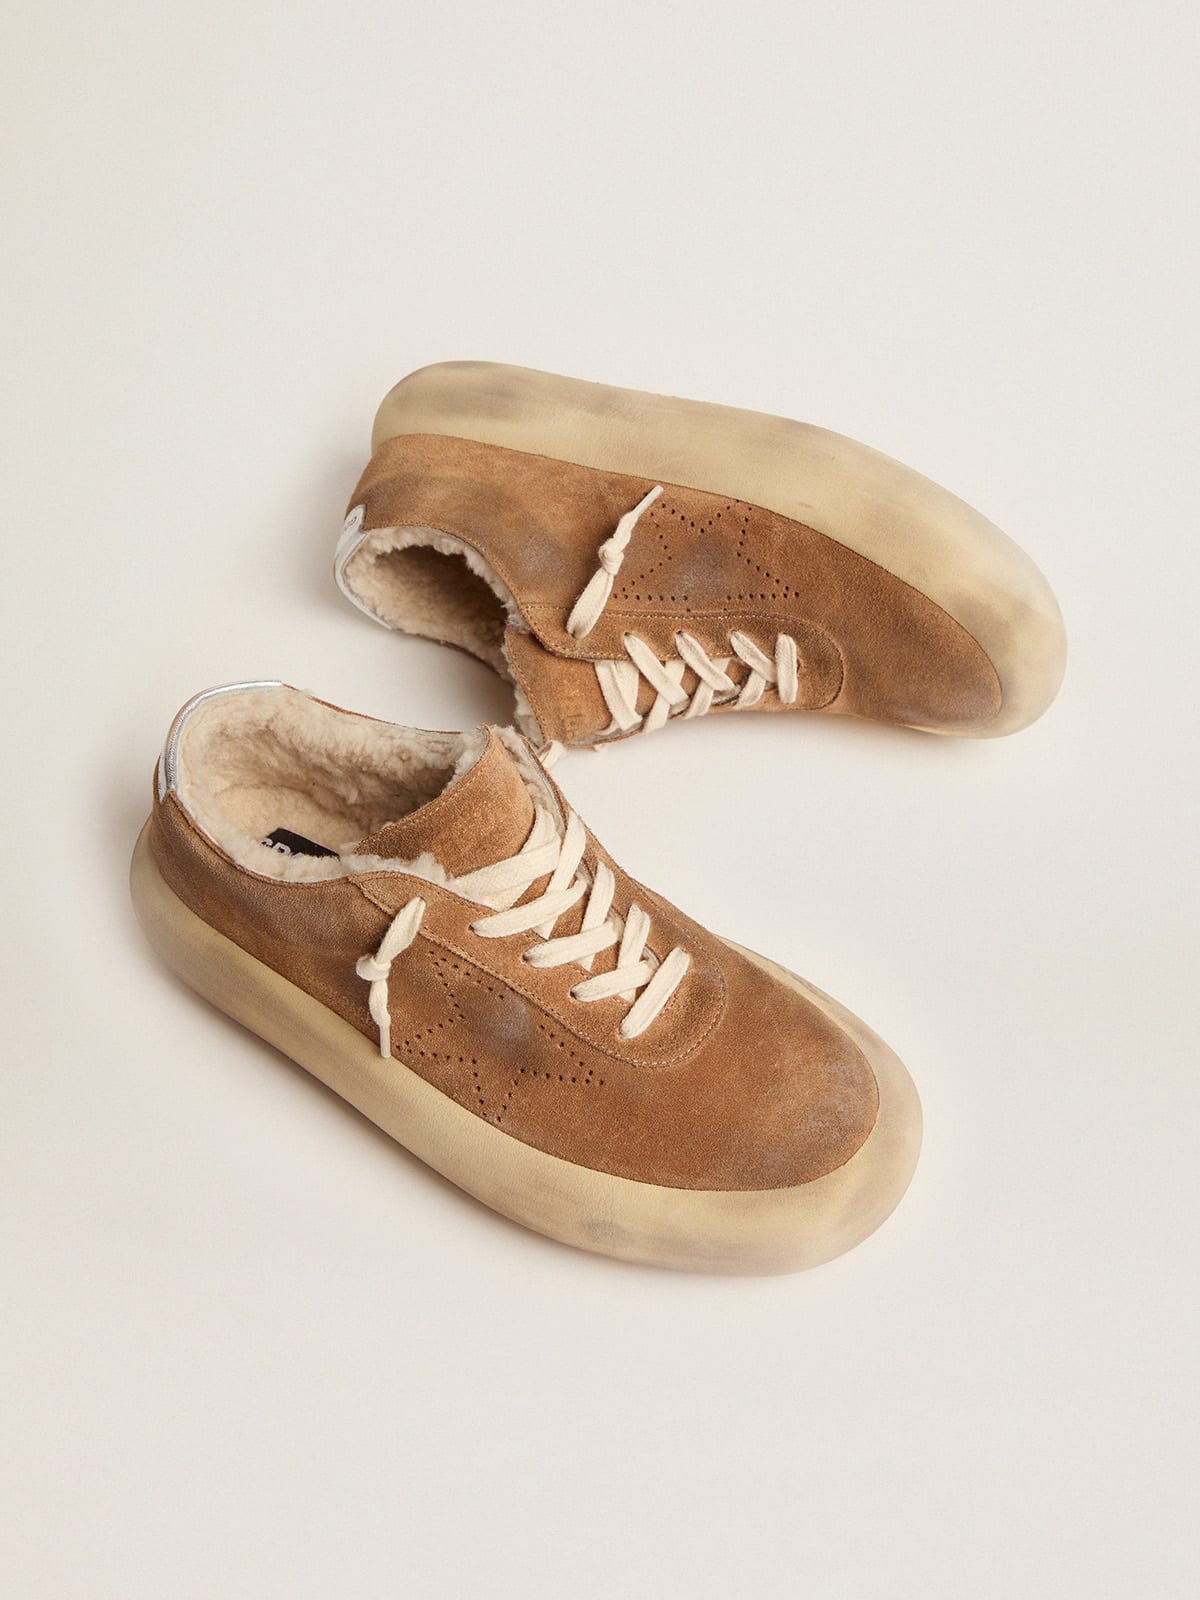 Golden Goose - Space-Star Uomo in suede color tabacco e fodera in shearling in 